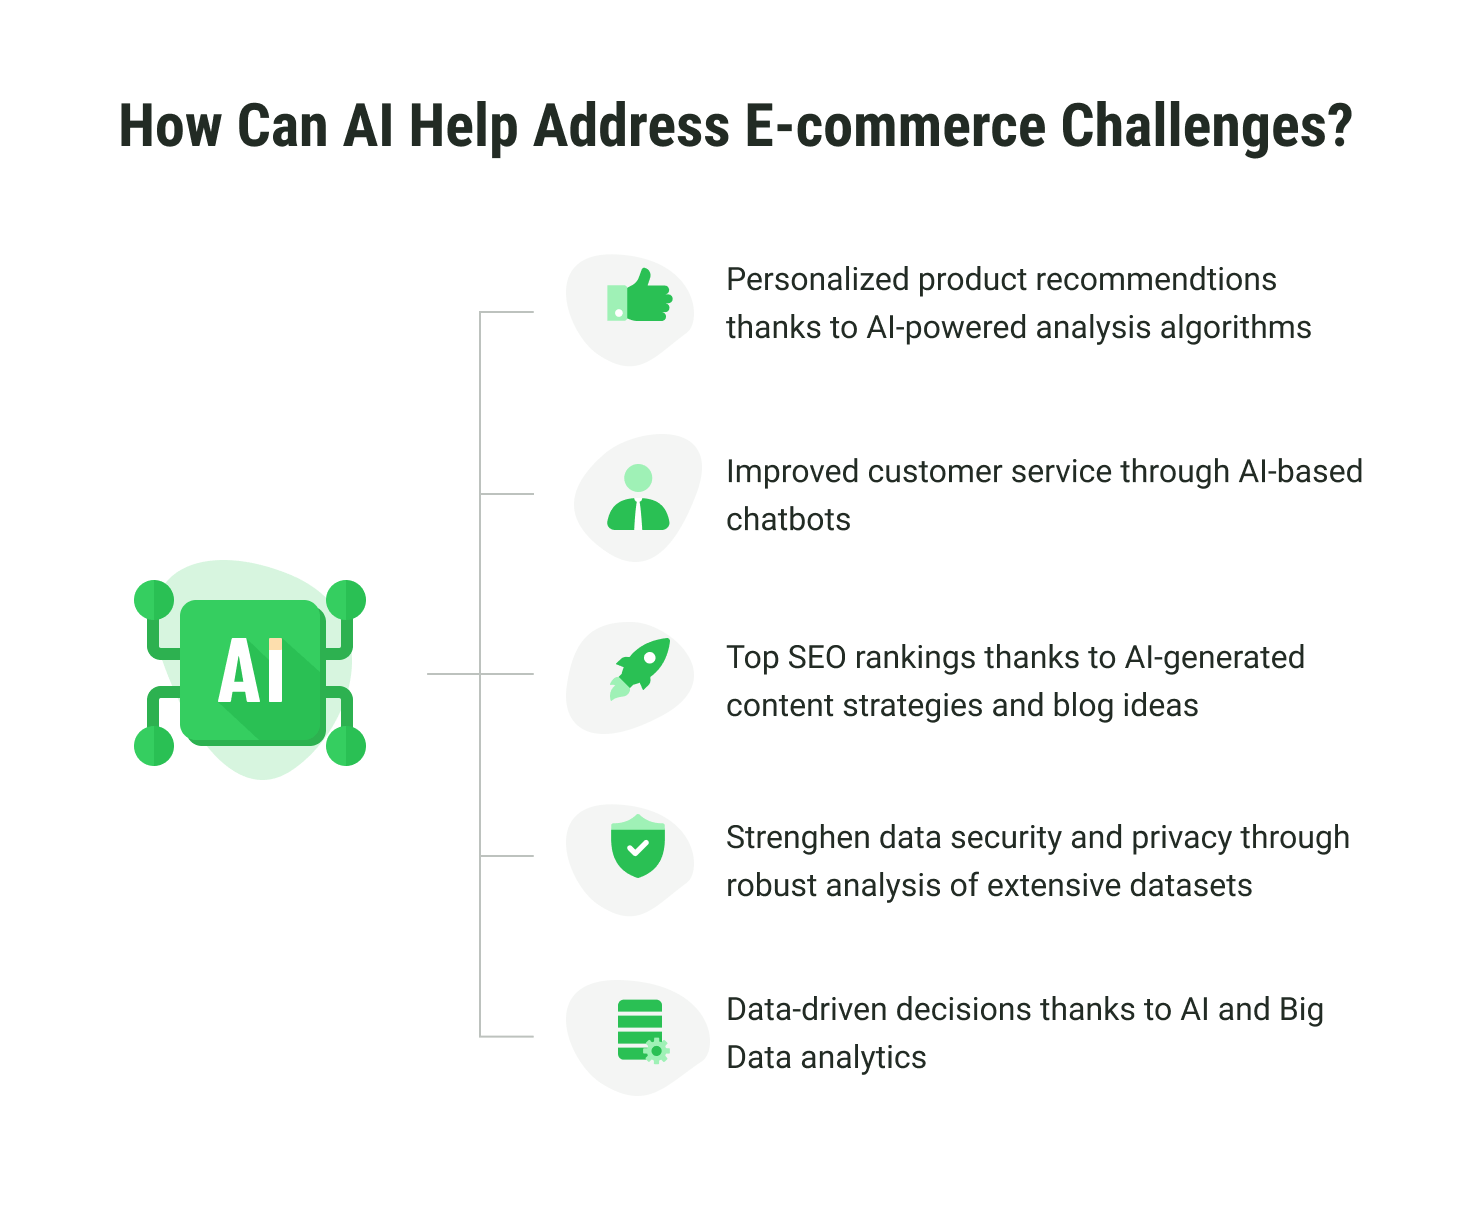 How Can AI Help Address E-commerce Challenges?